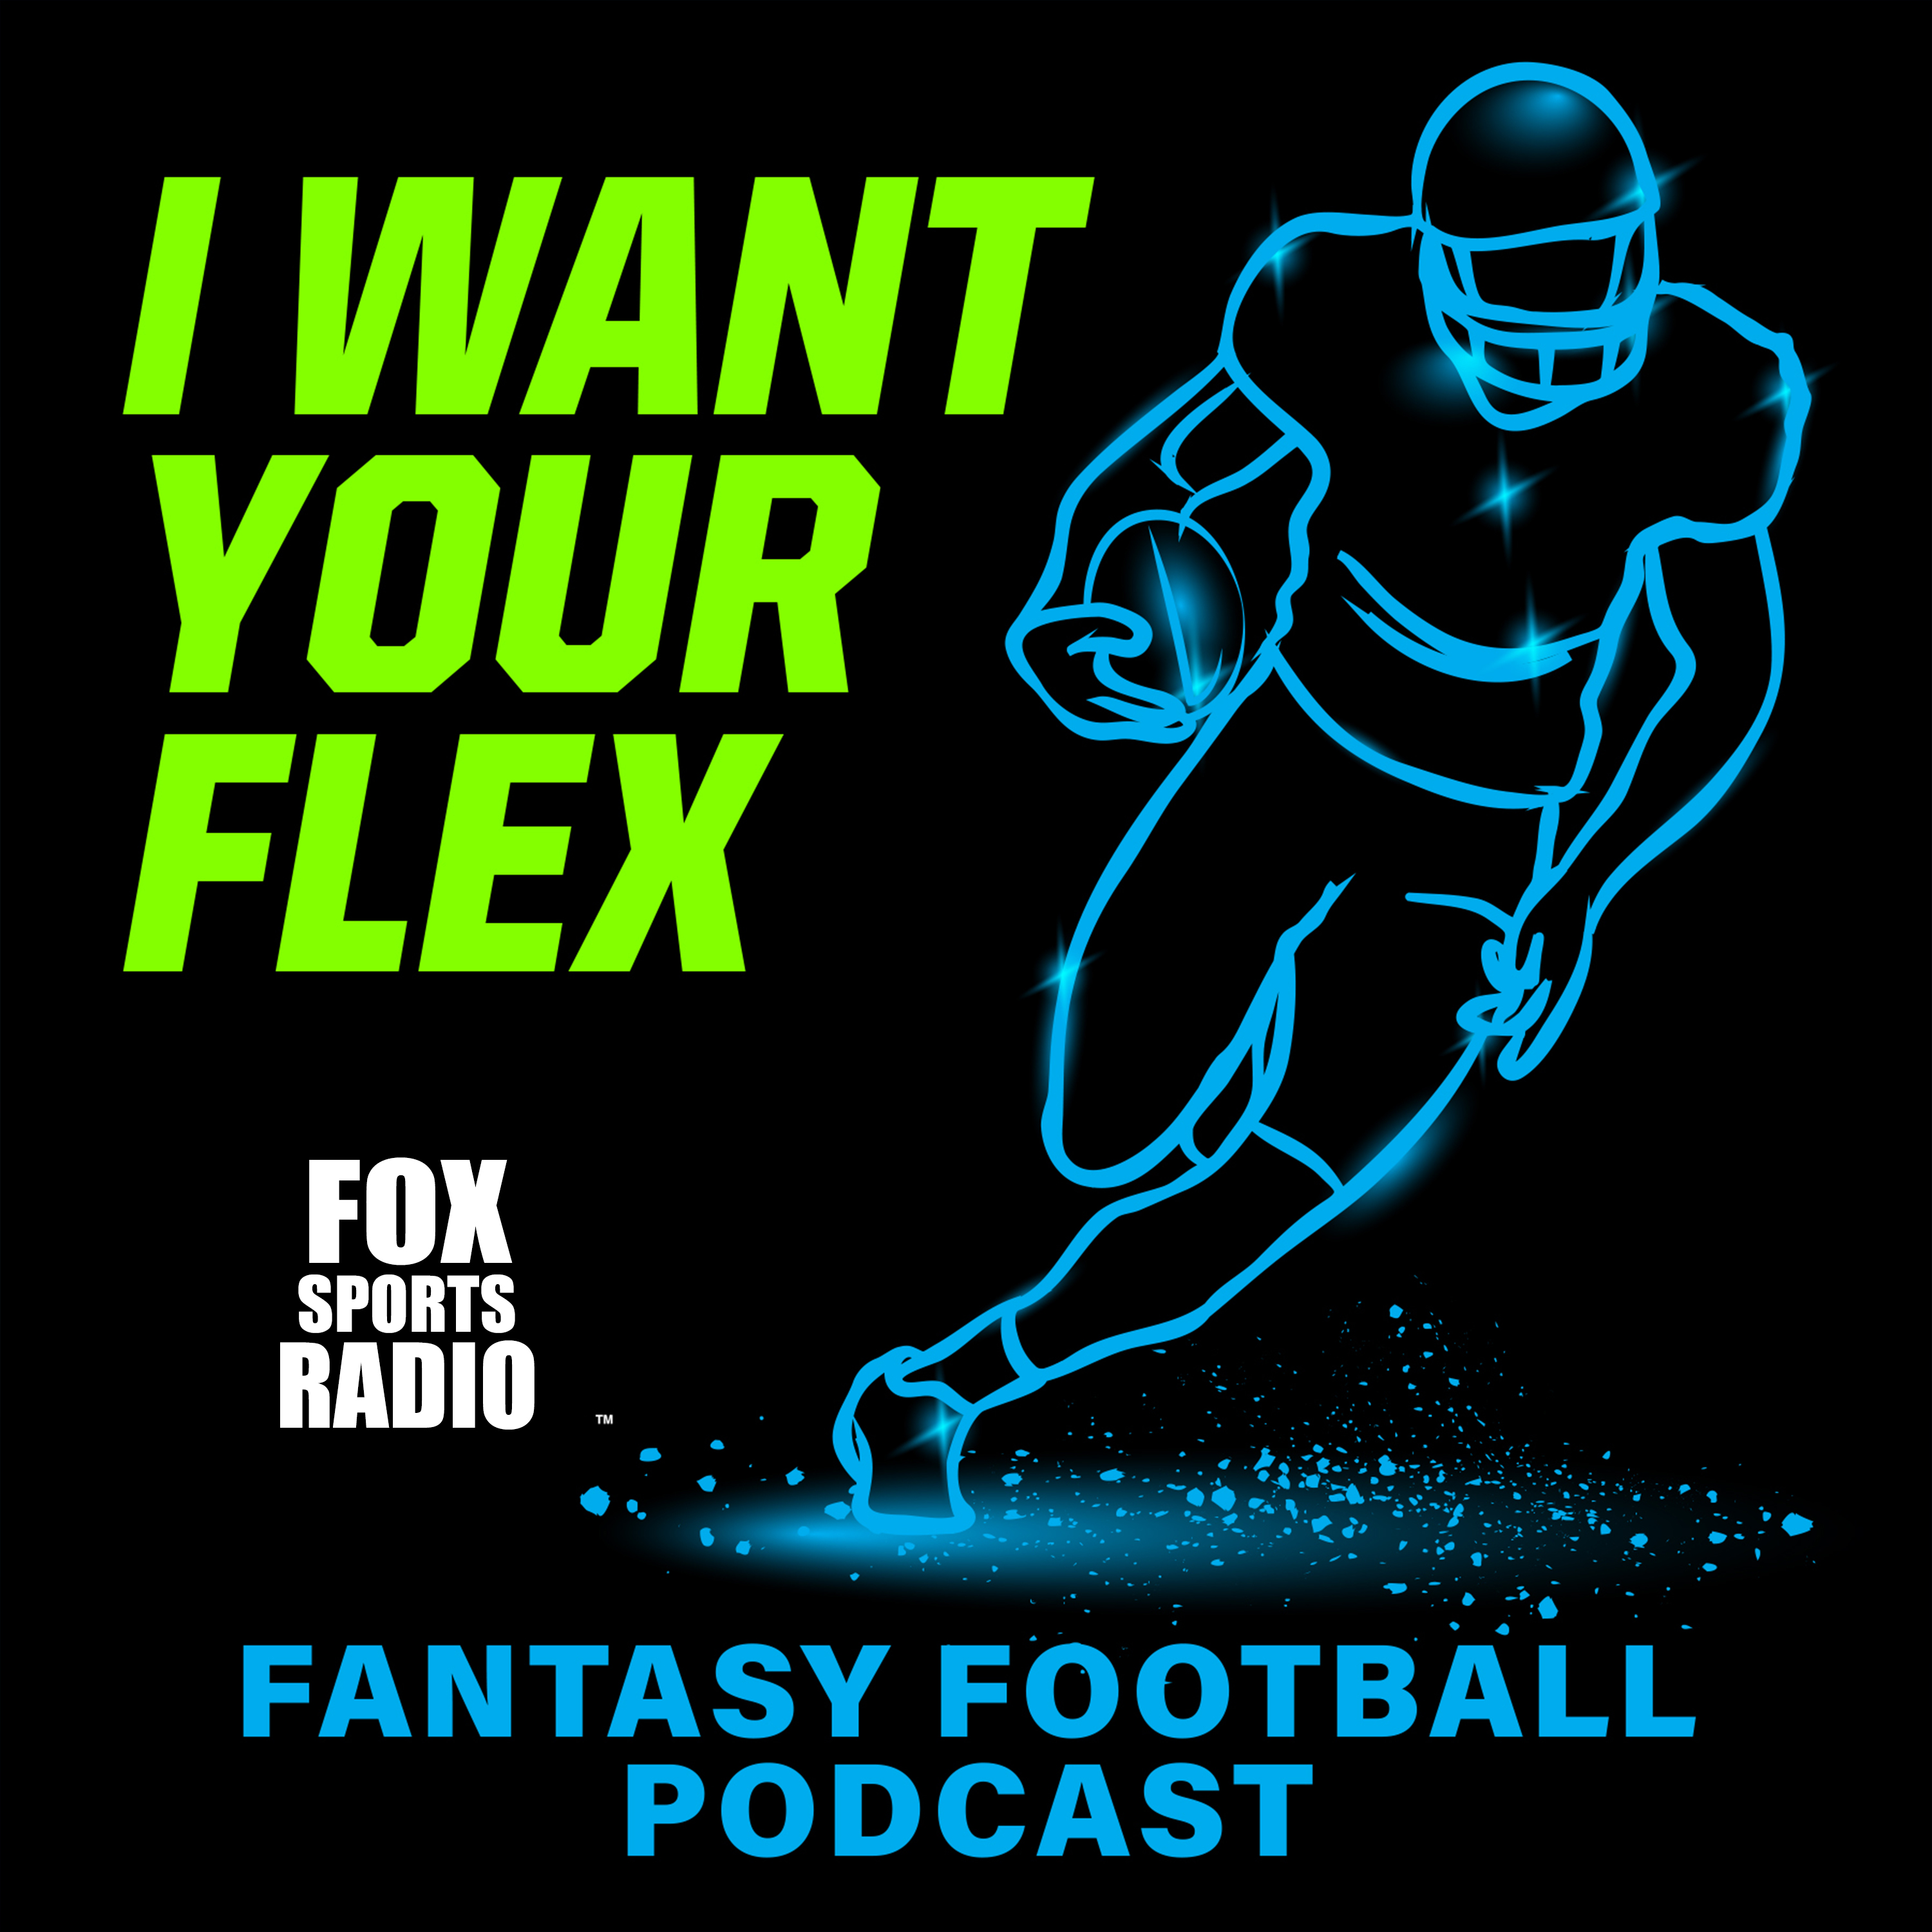 I WANT YOUR FLEX - Week 18 Rankings and Hot Plays